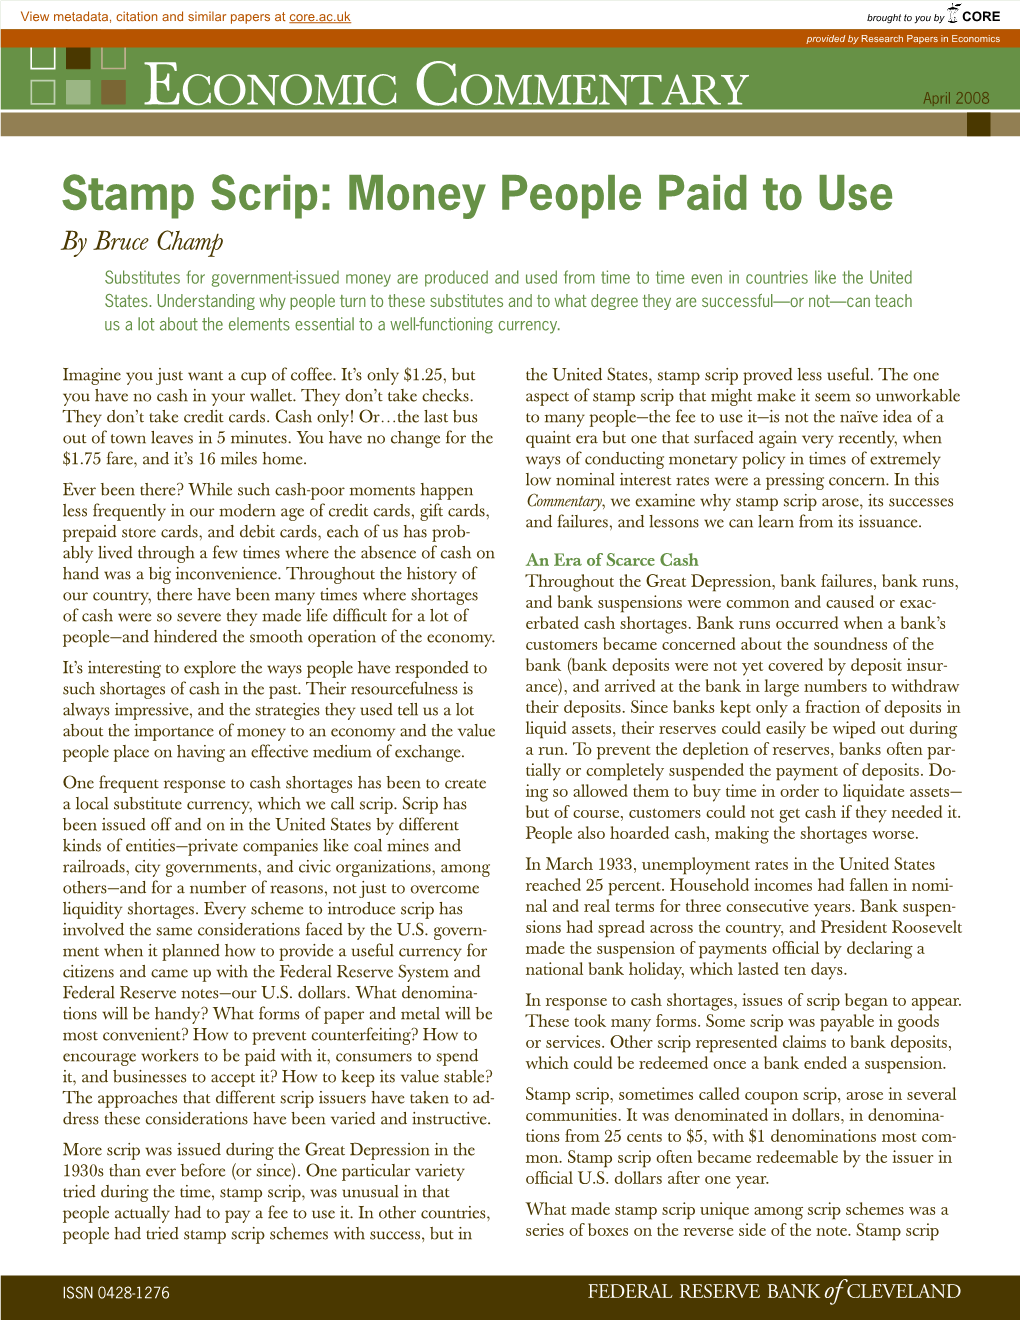 Stamp Scrip: Money People Paid To